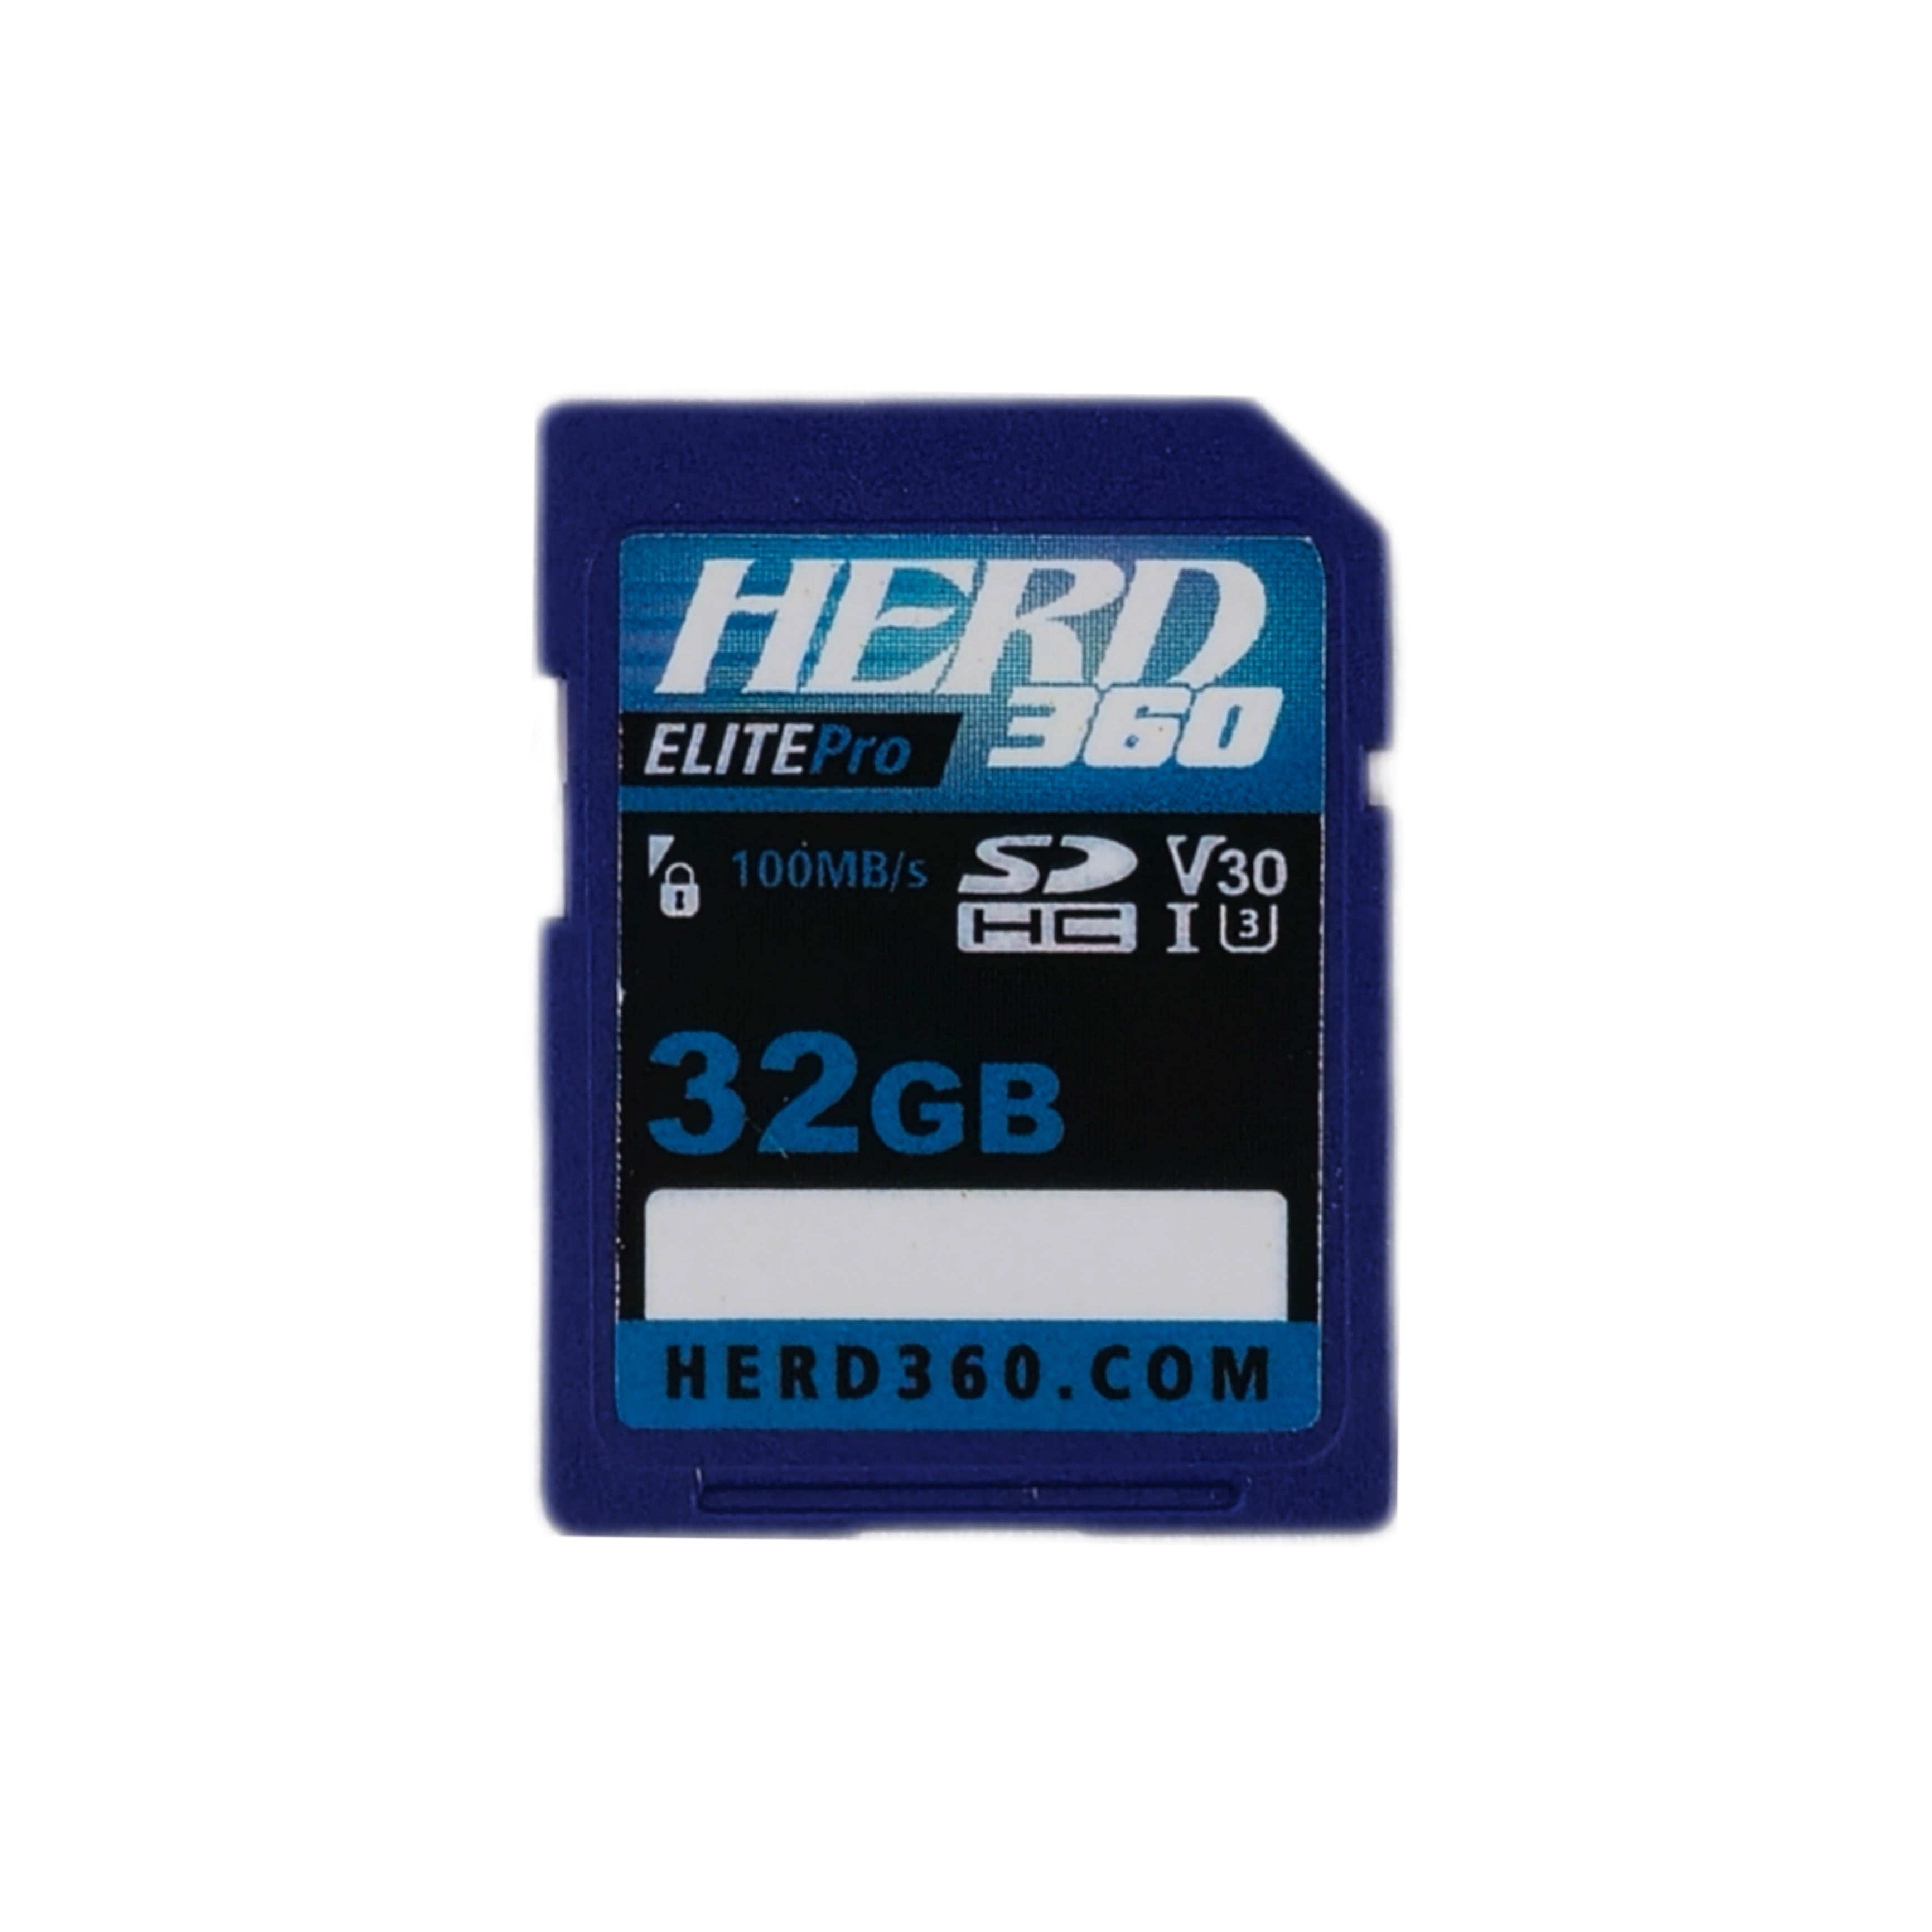 SD Card loaded with Tactacam Upgrade Firmware